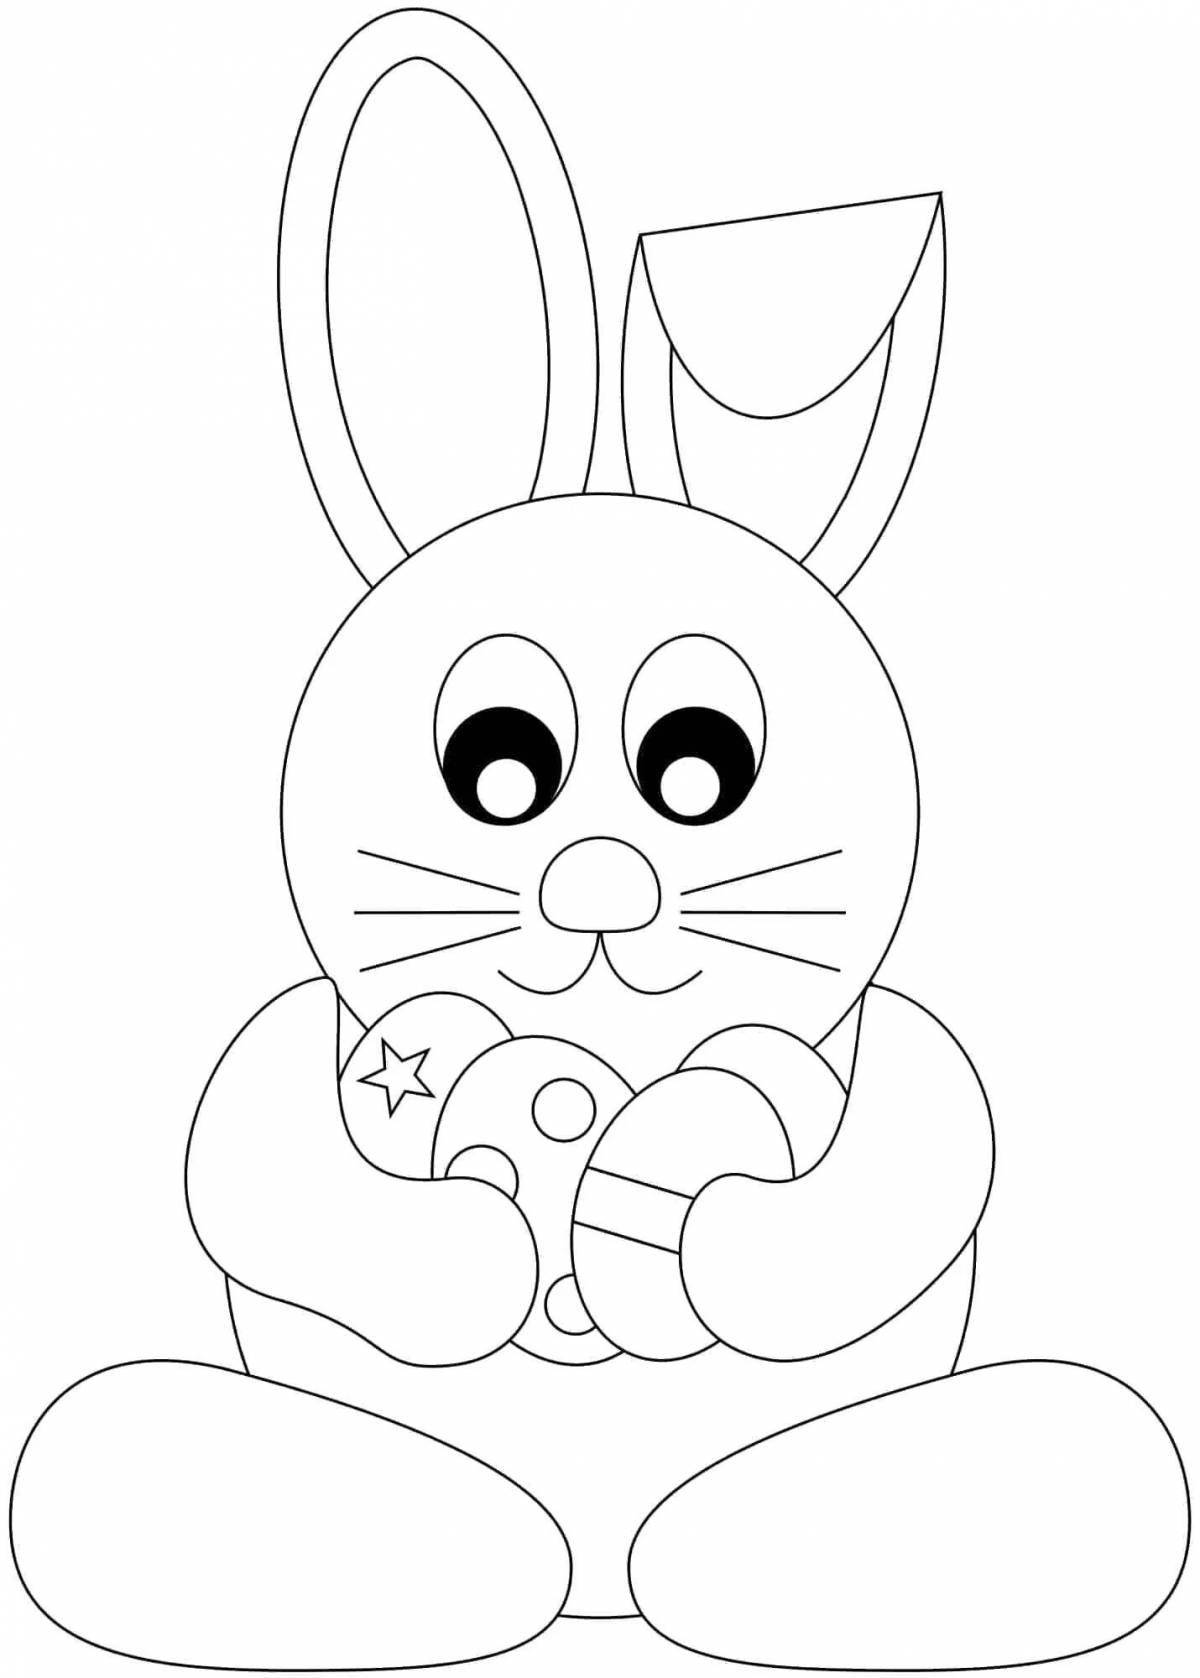 Adorable coloring bunny pattern